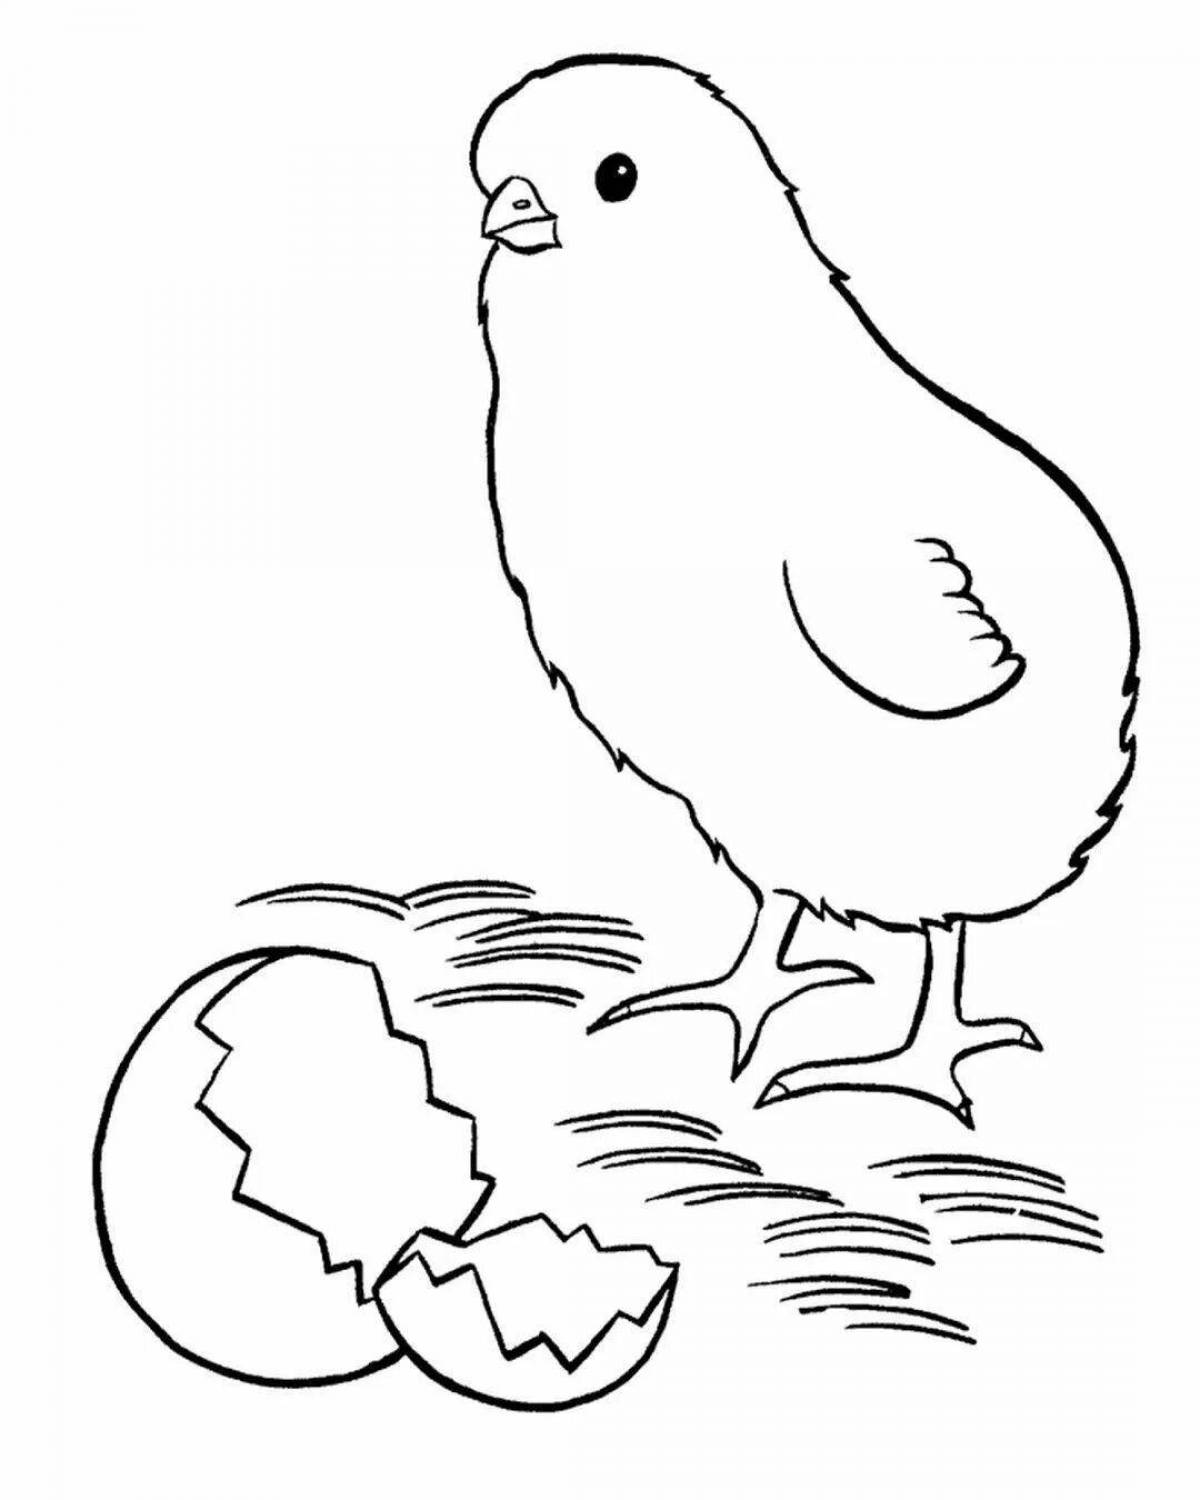 Chicken tempting coloring book